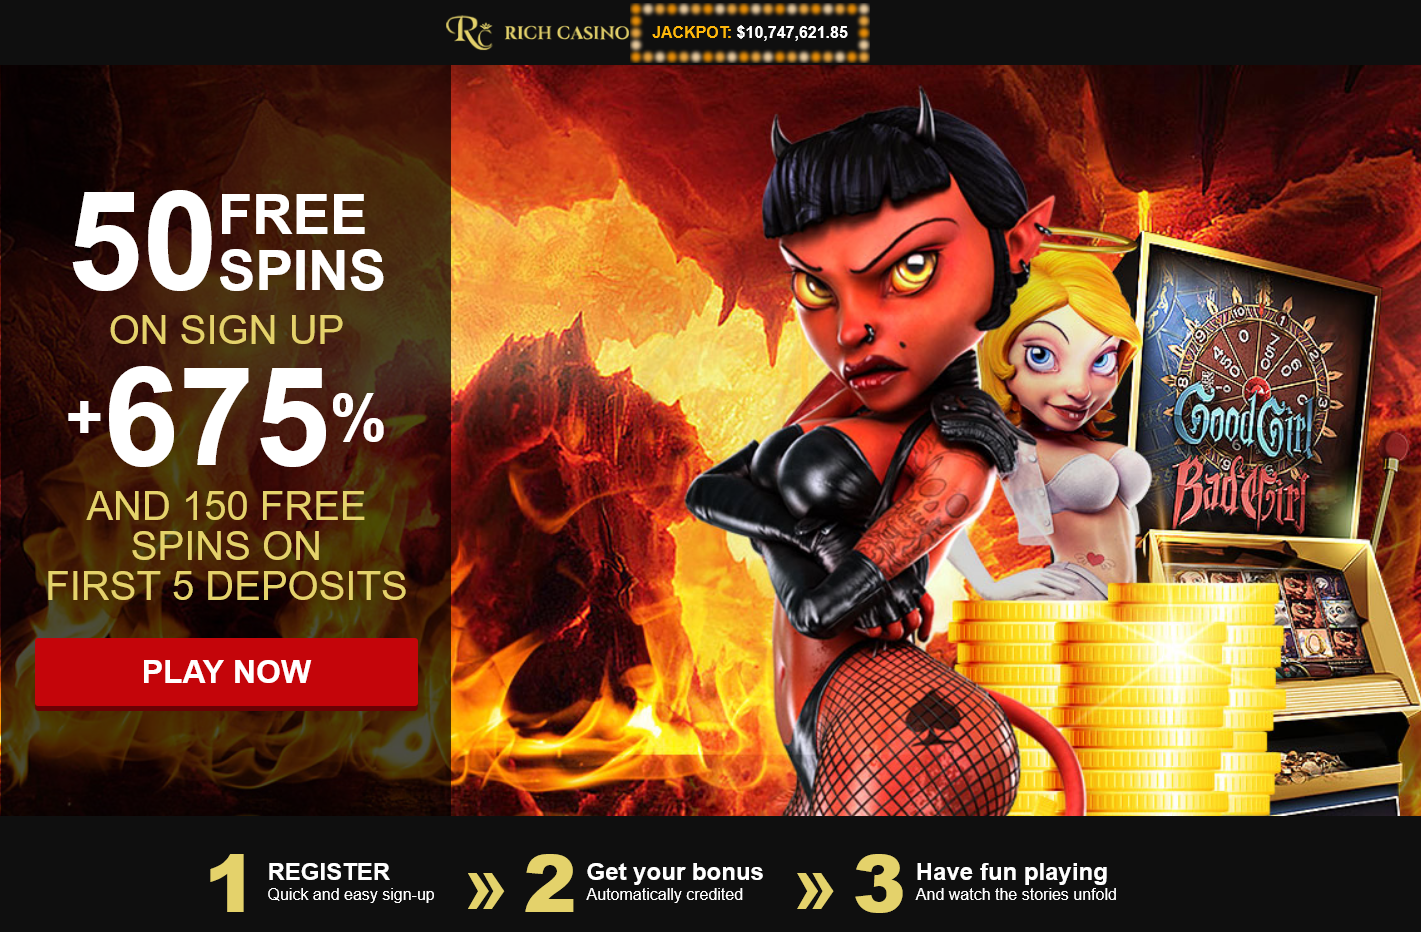 50 FREE SPINS ON SIGN UP + 675% AND 150 FREE SPINS ON FIRST 5 DEPOSITS